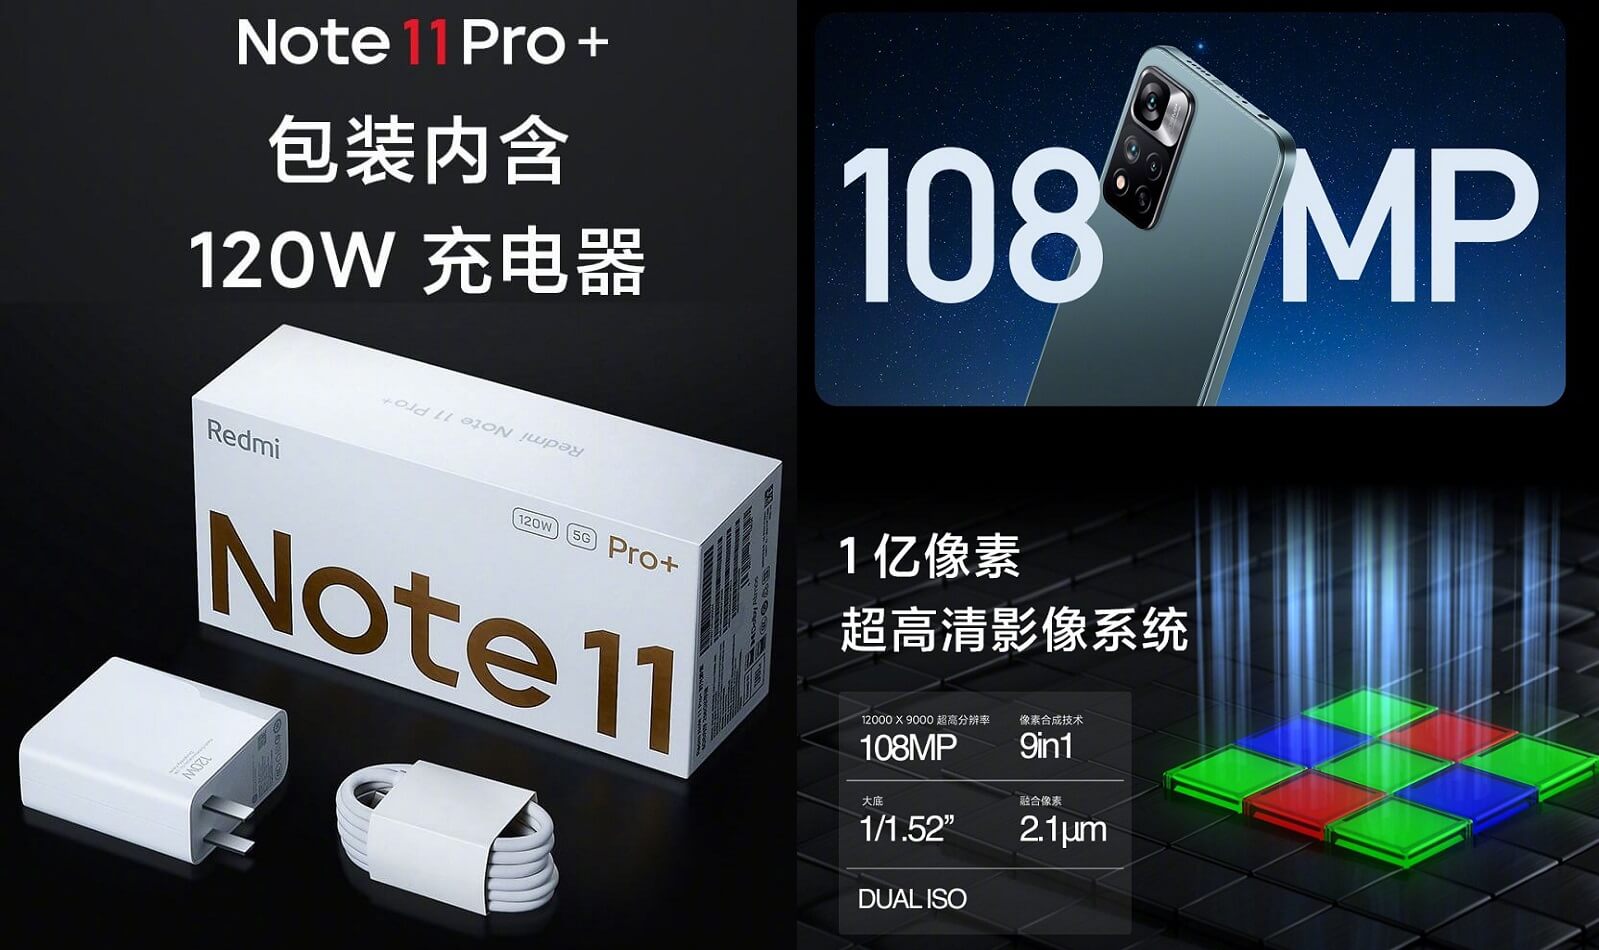 Redmi Note 11 Pro Plus 120W fast charger cameras